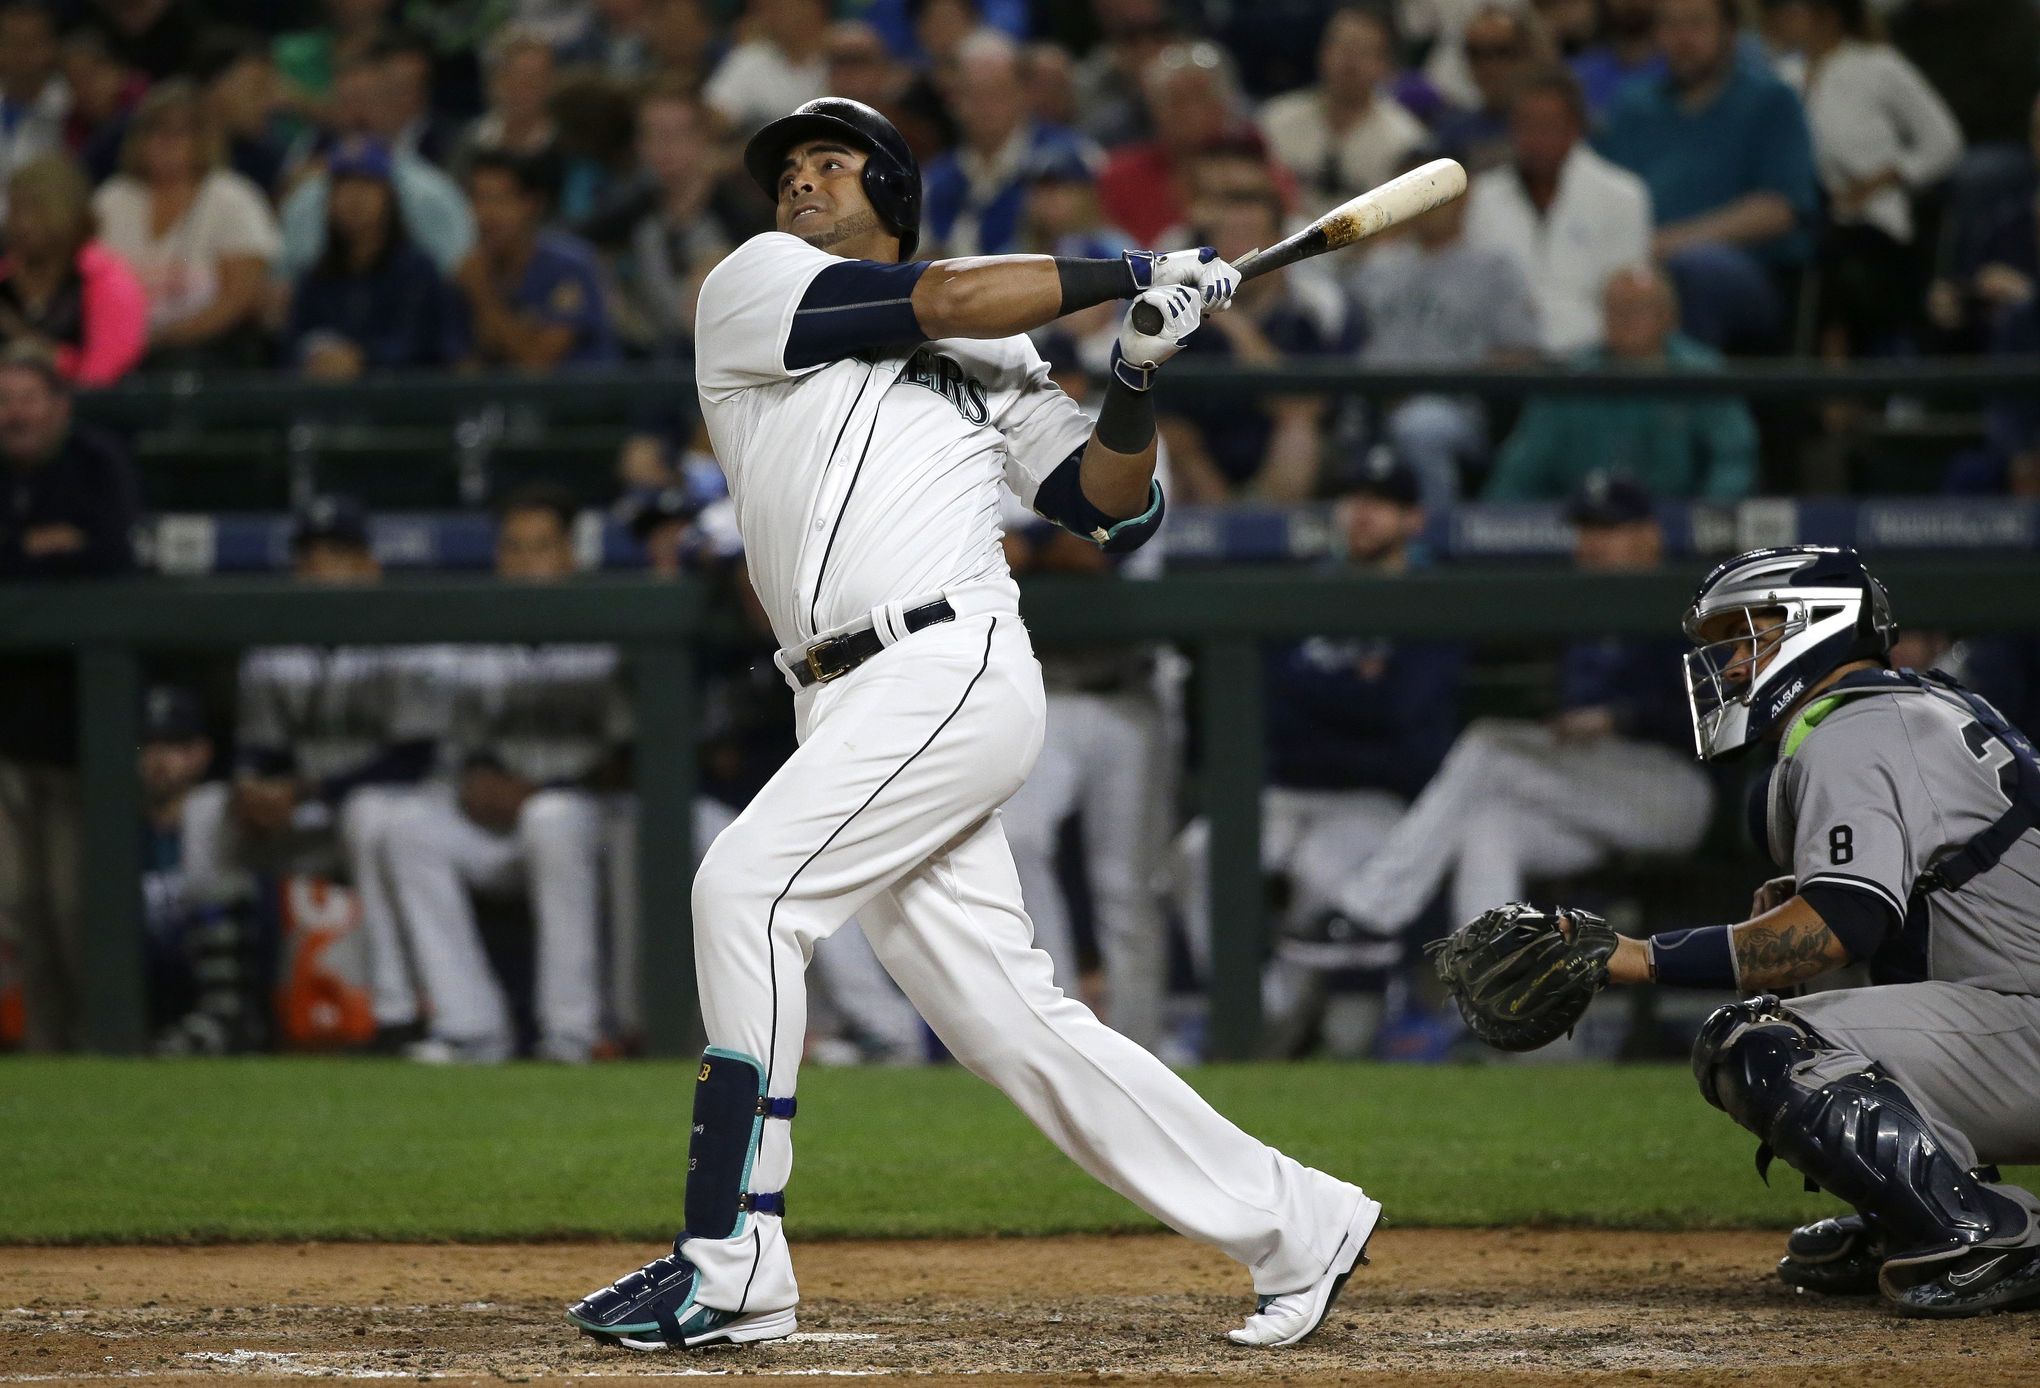 Nelson Cruz launches Boomstick23 Foundation!